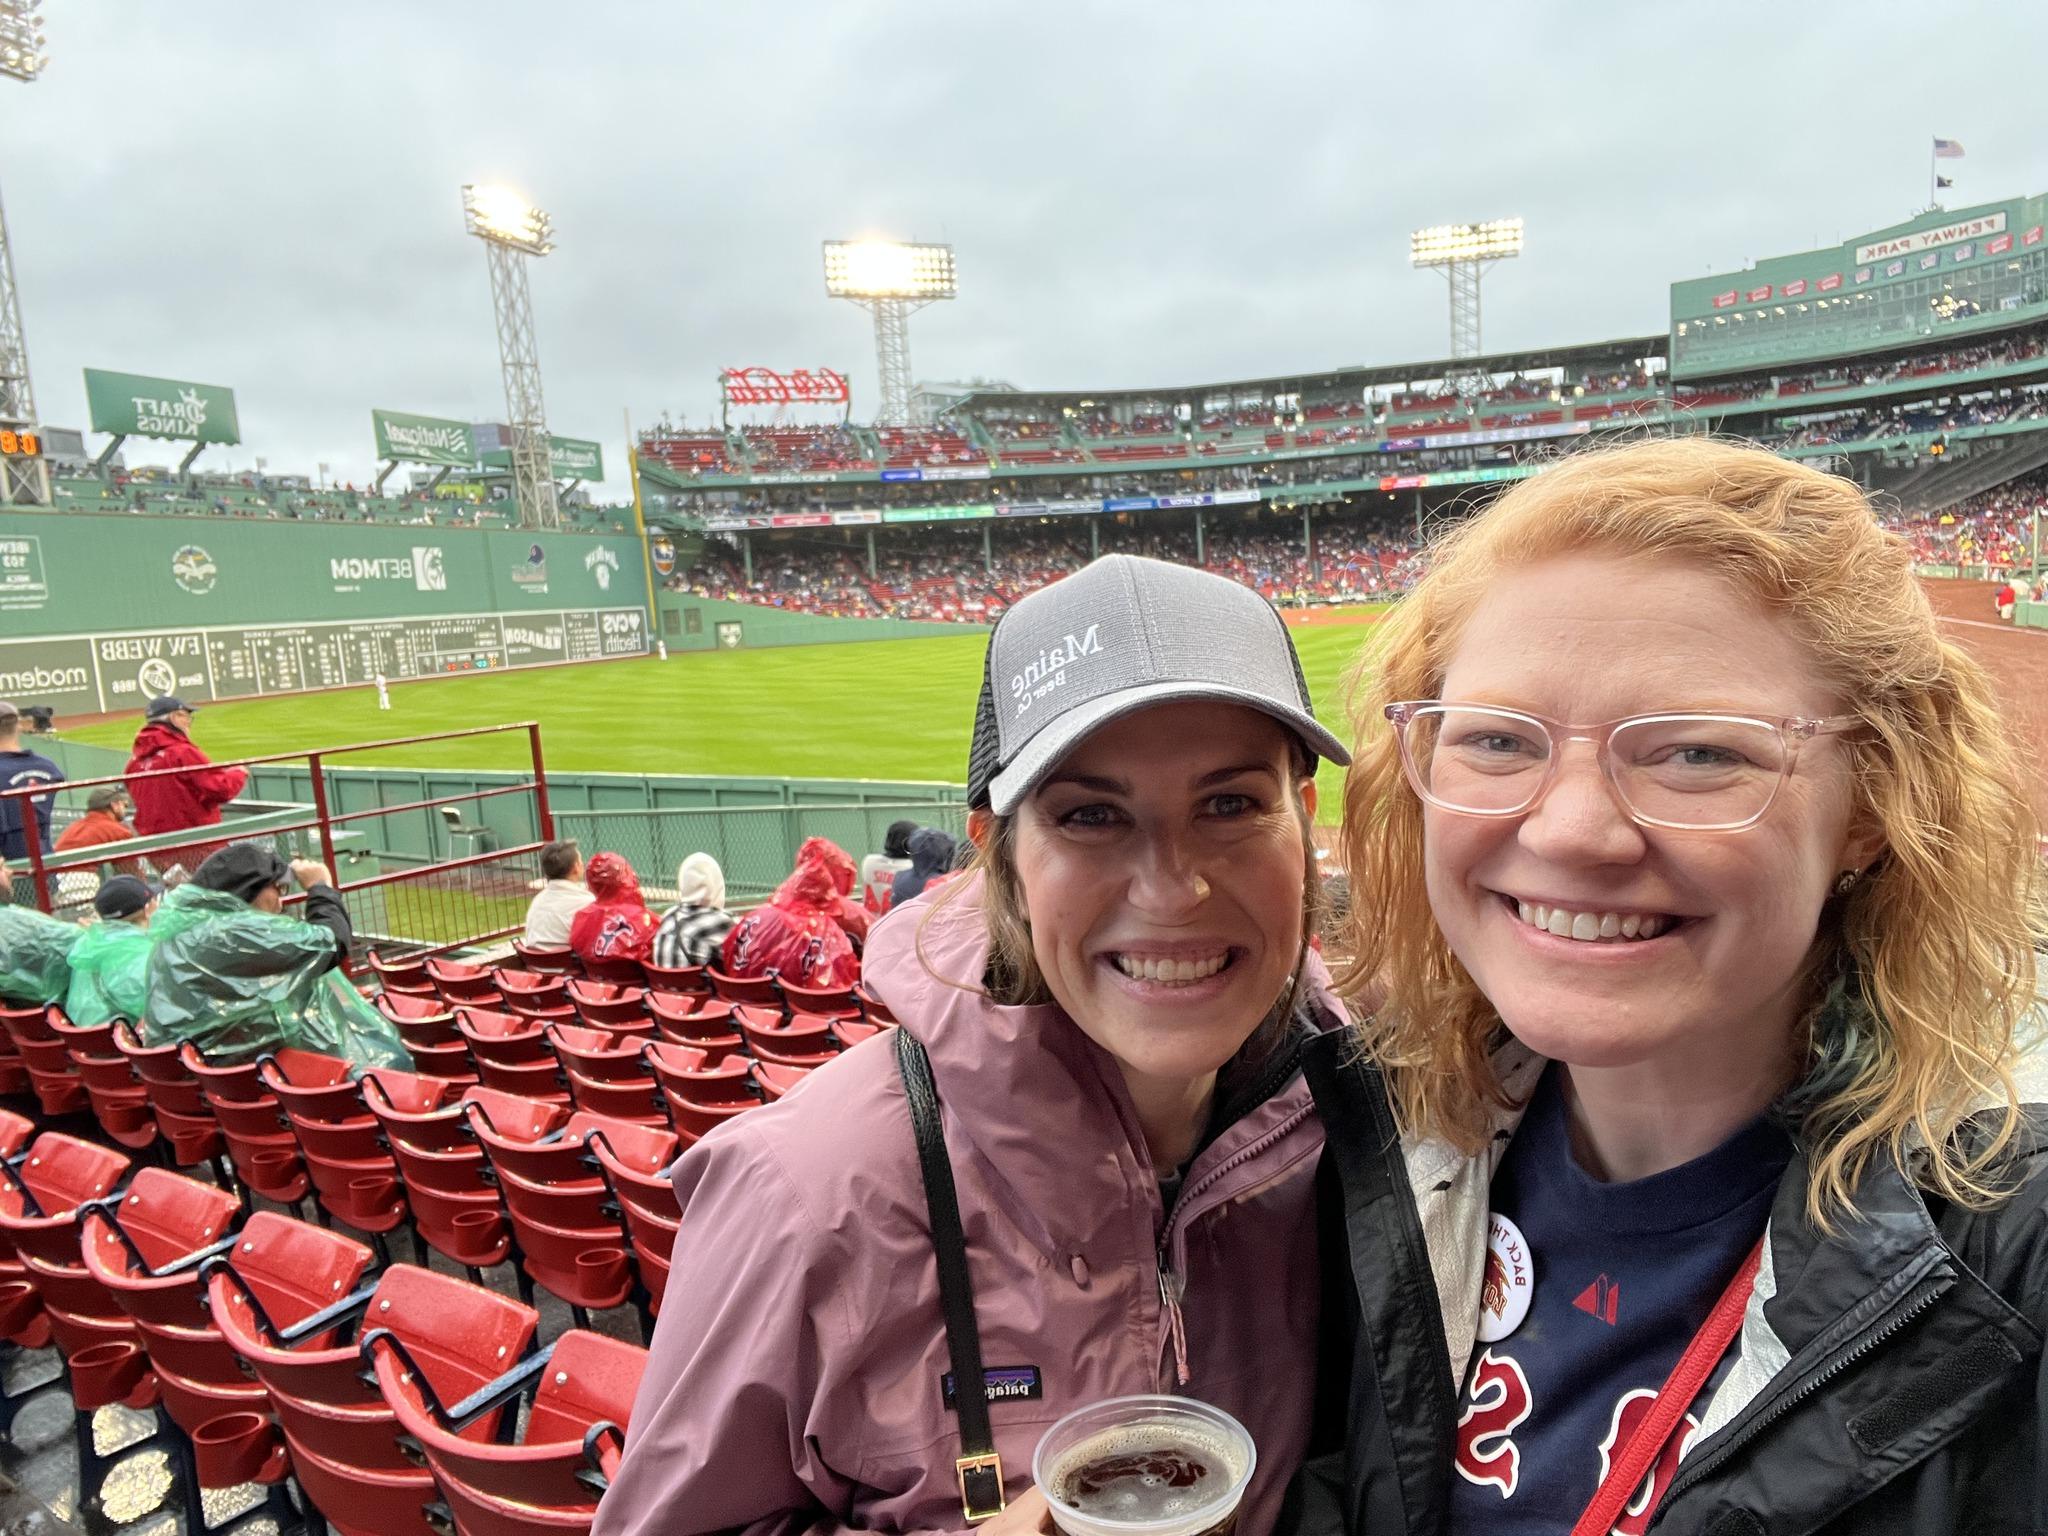 Boston Red Sox Game attendees